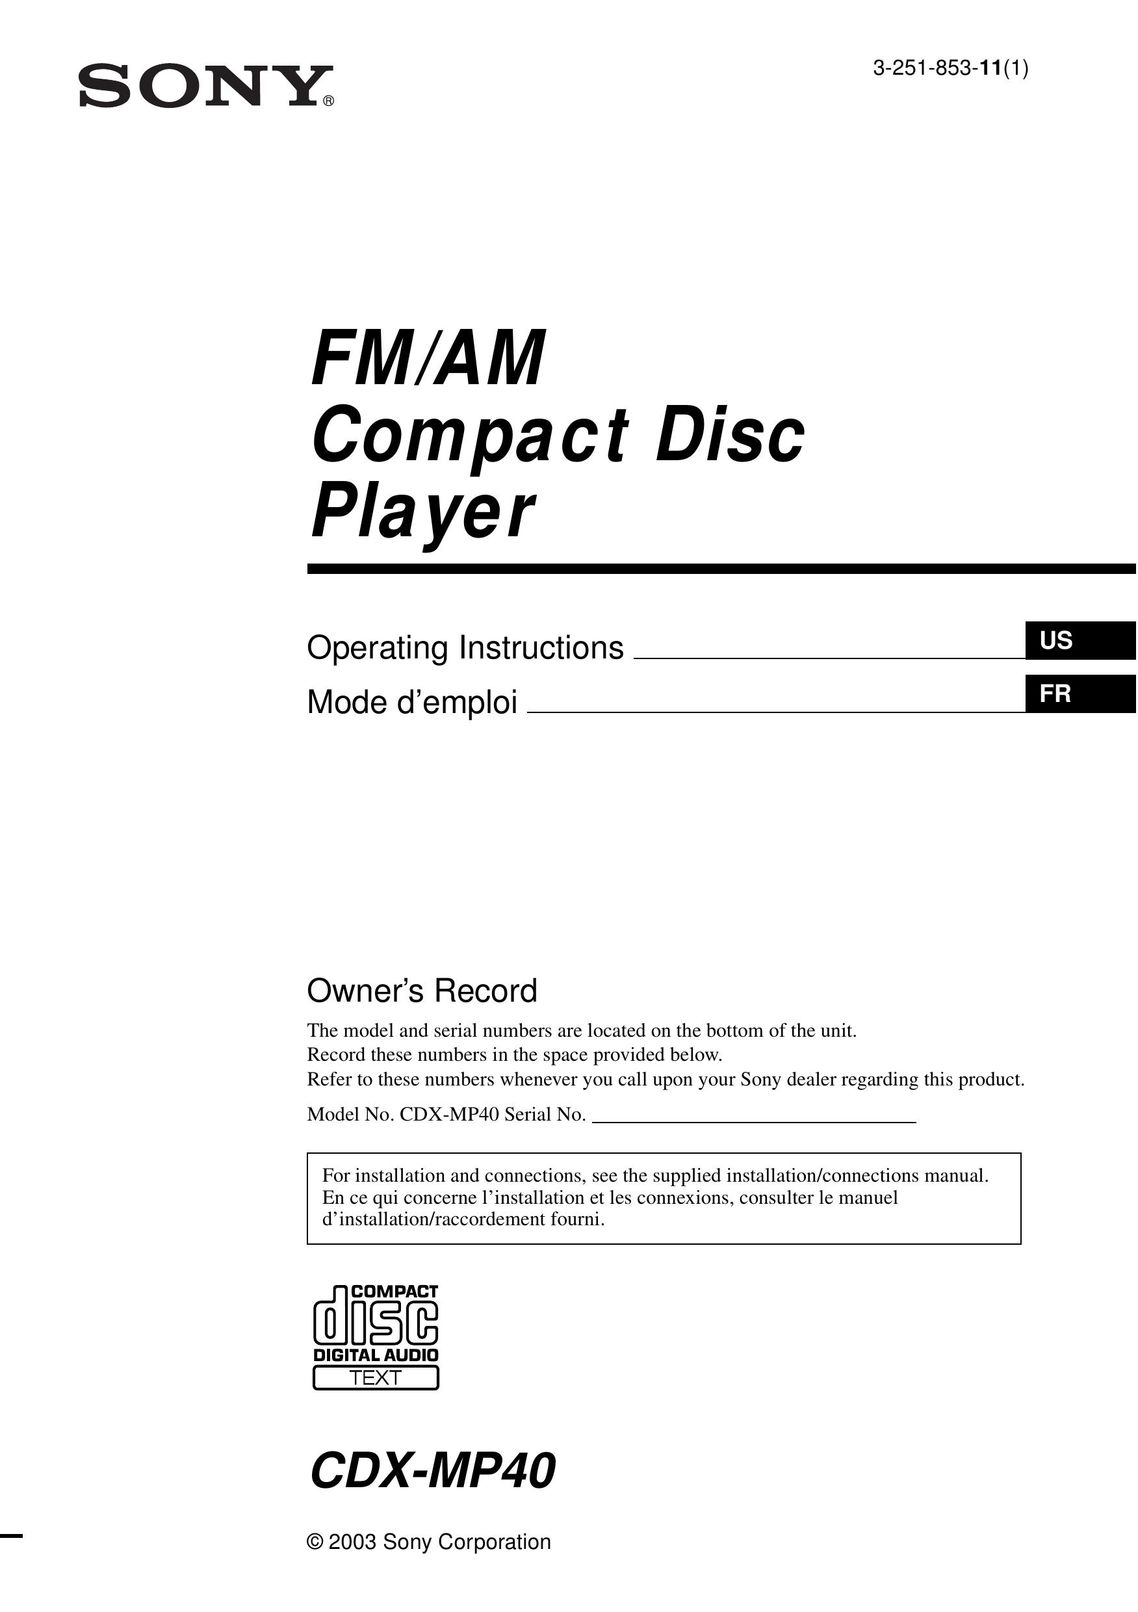 Sony CDX-MP40 Portable CD Player User Manual